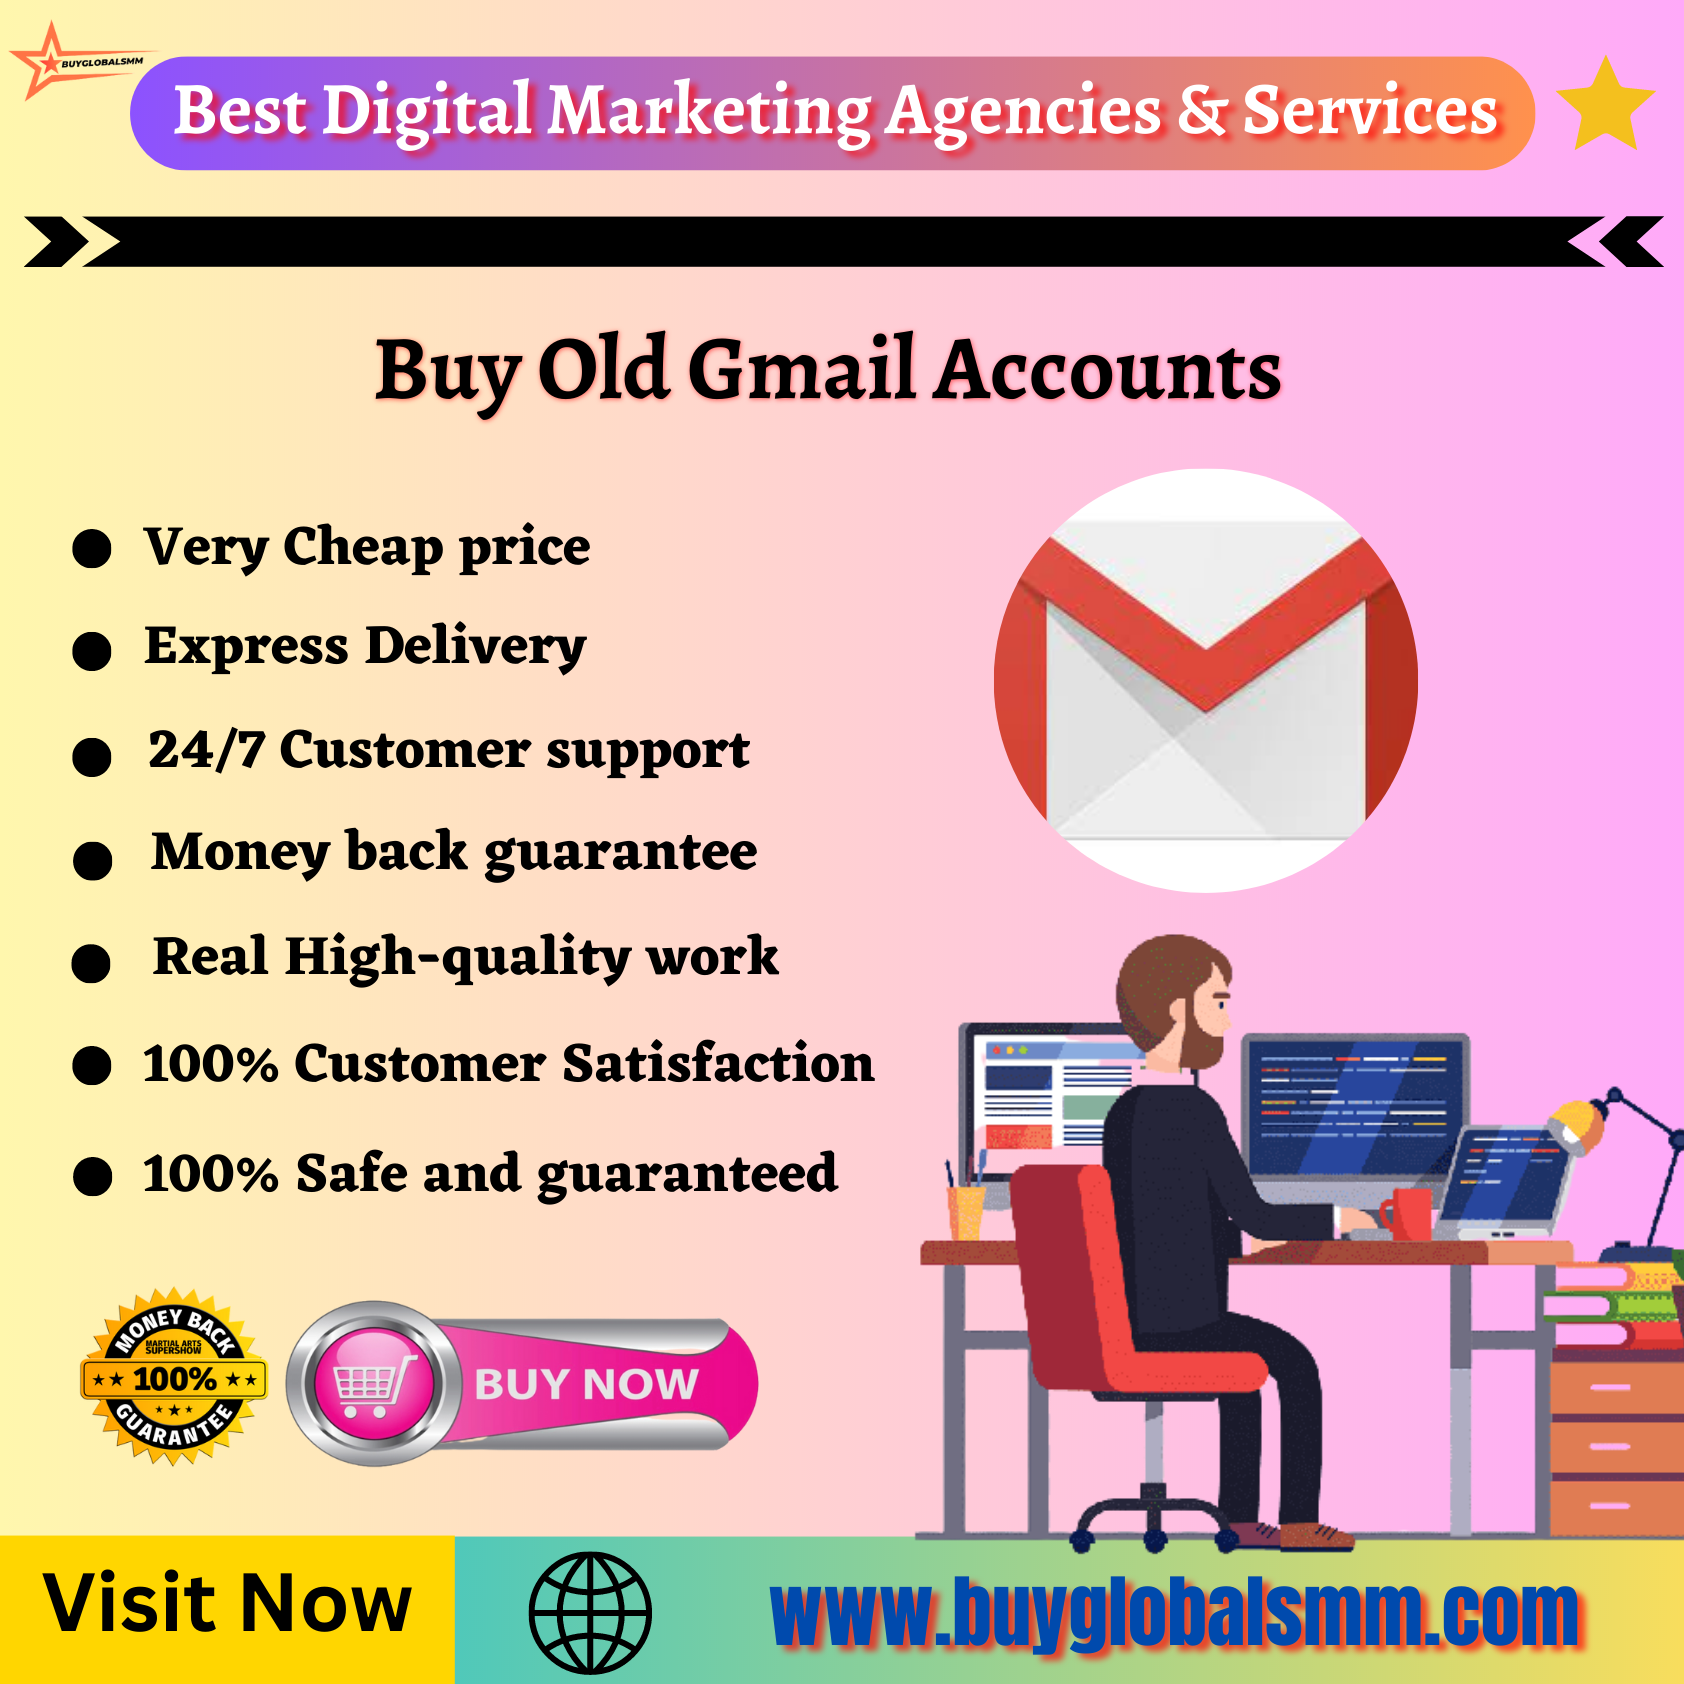 Buy Old Gmail Accounts-100% usa numder verified, gmail...